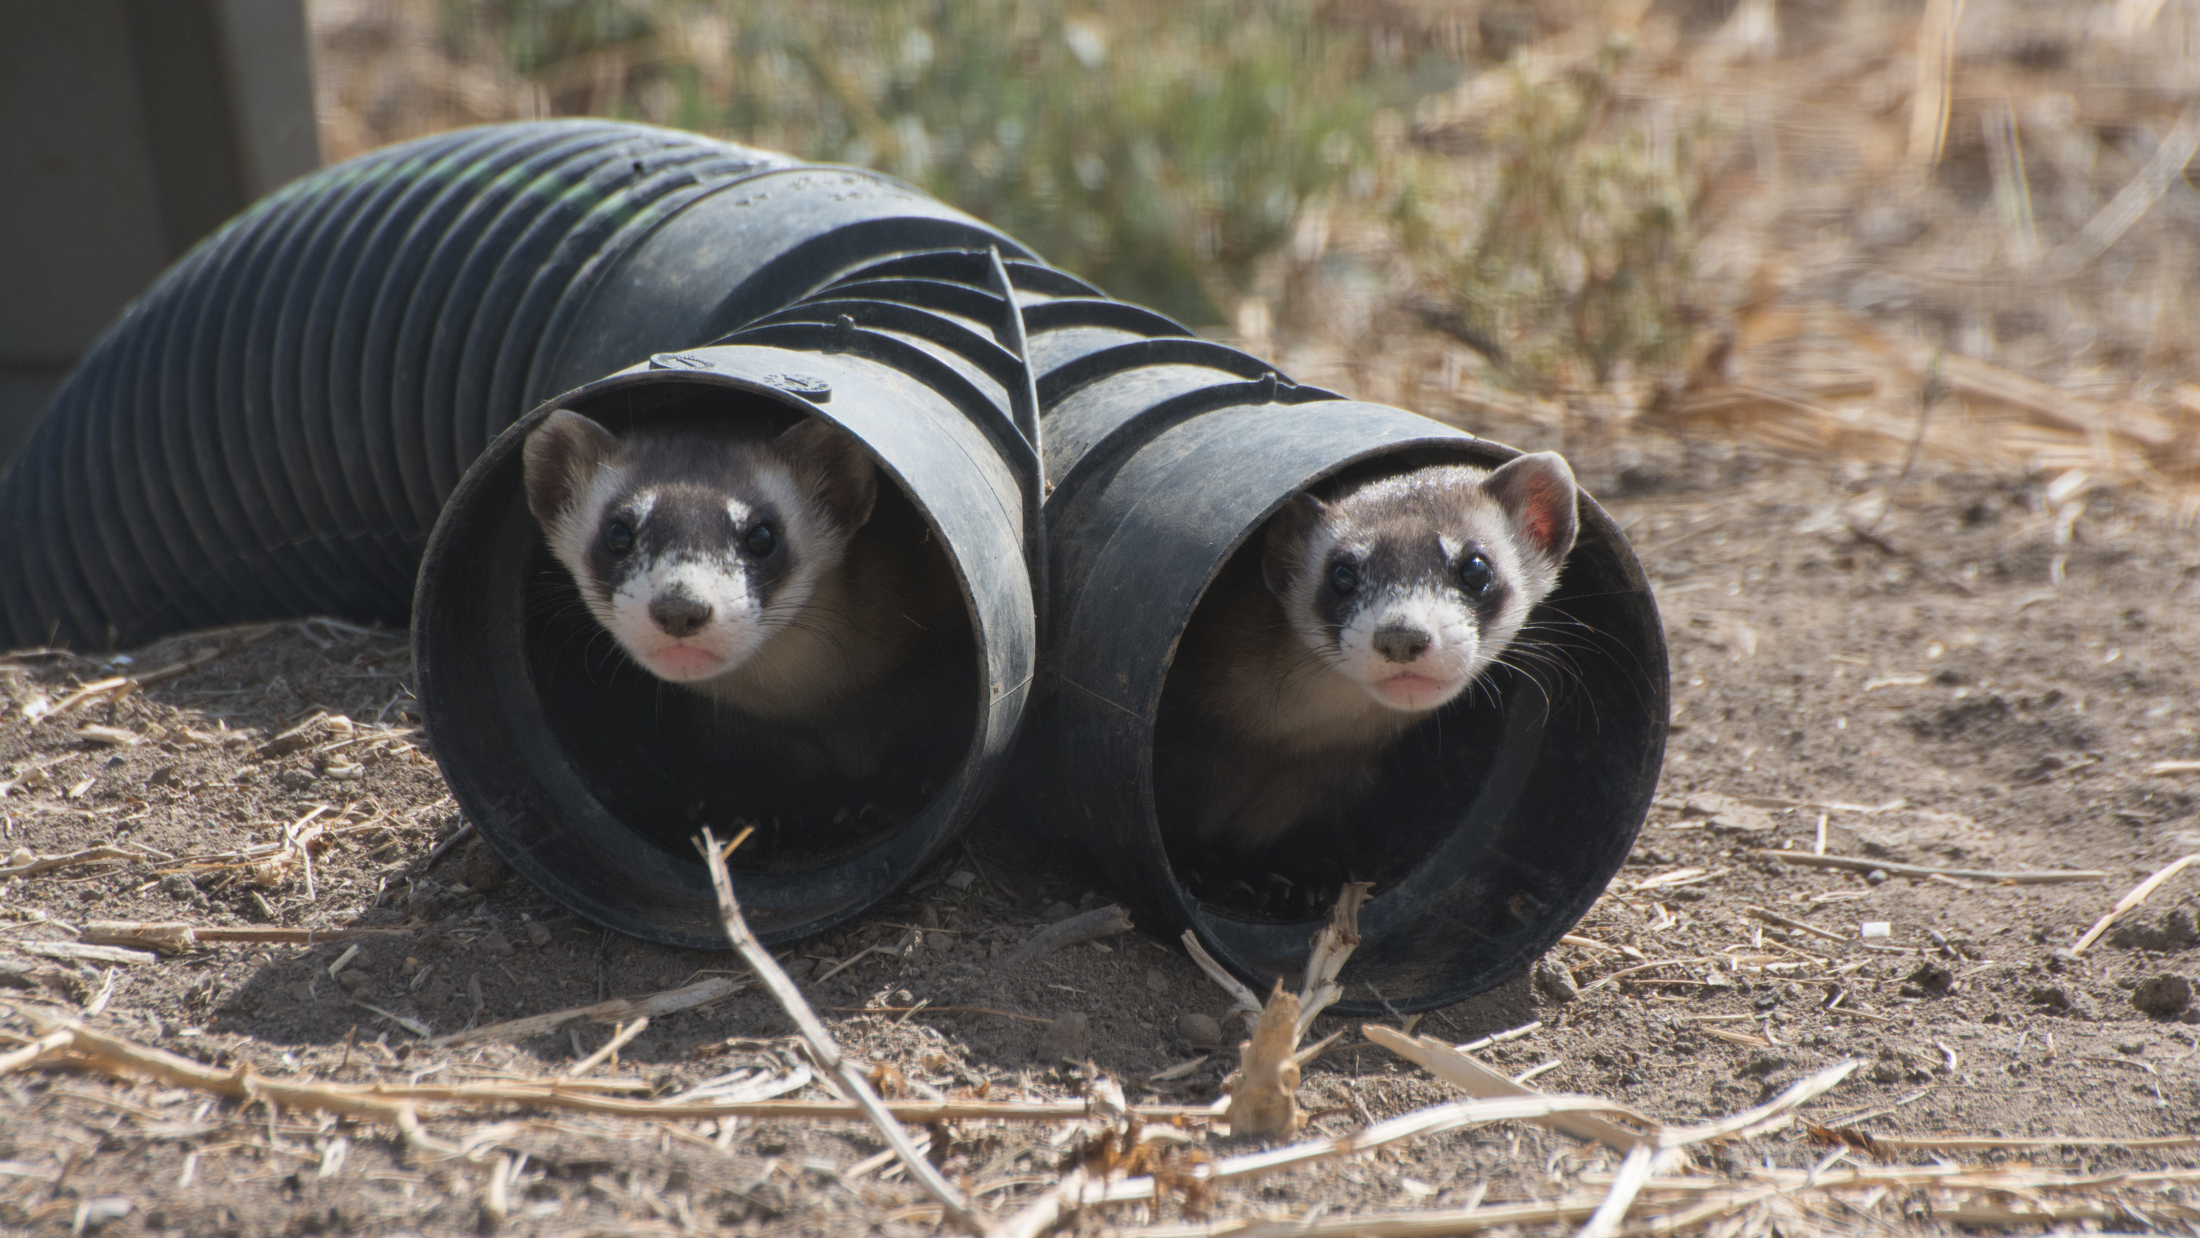 Black-footed ferrets peek out from a pipe that mimicks a prairie dog burrow. Photo © Kimberly Fraser/USFWS